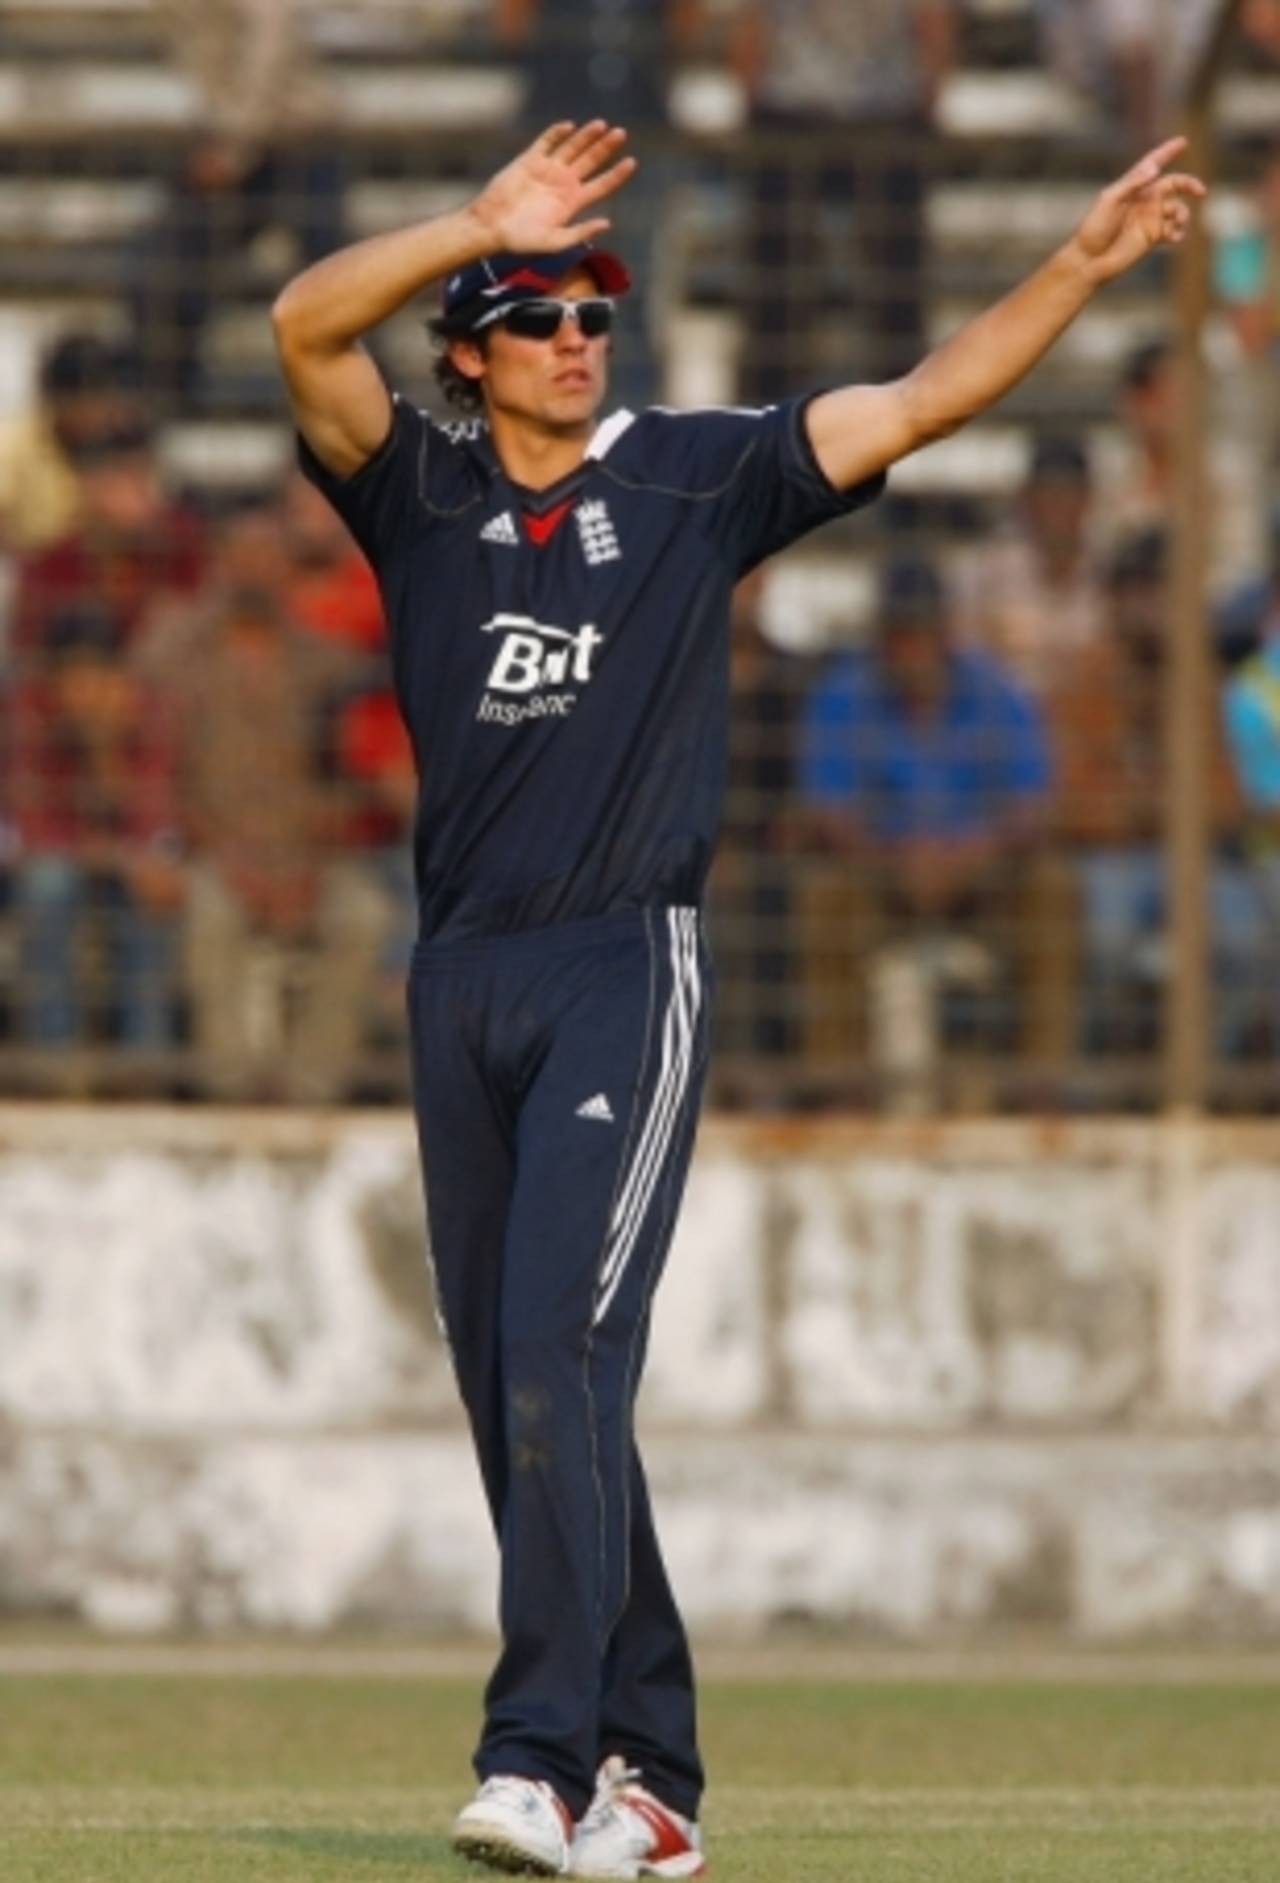 England captain Alastair Cook changes his field, England in Bangladesh, February 23, 2010